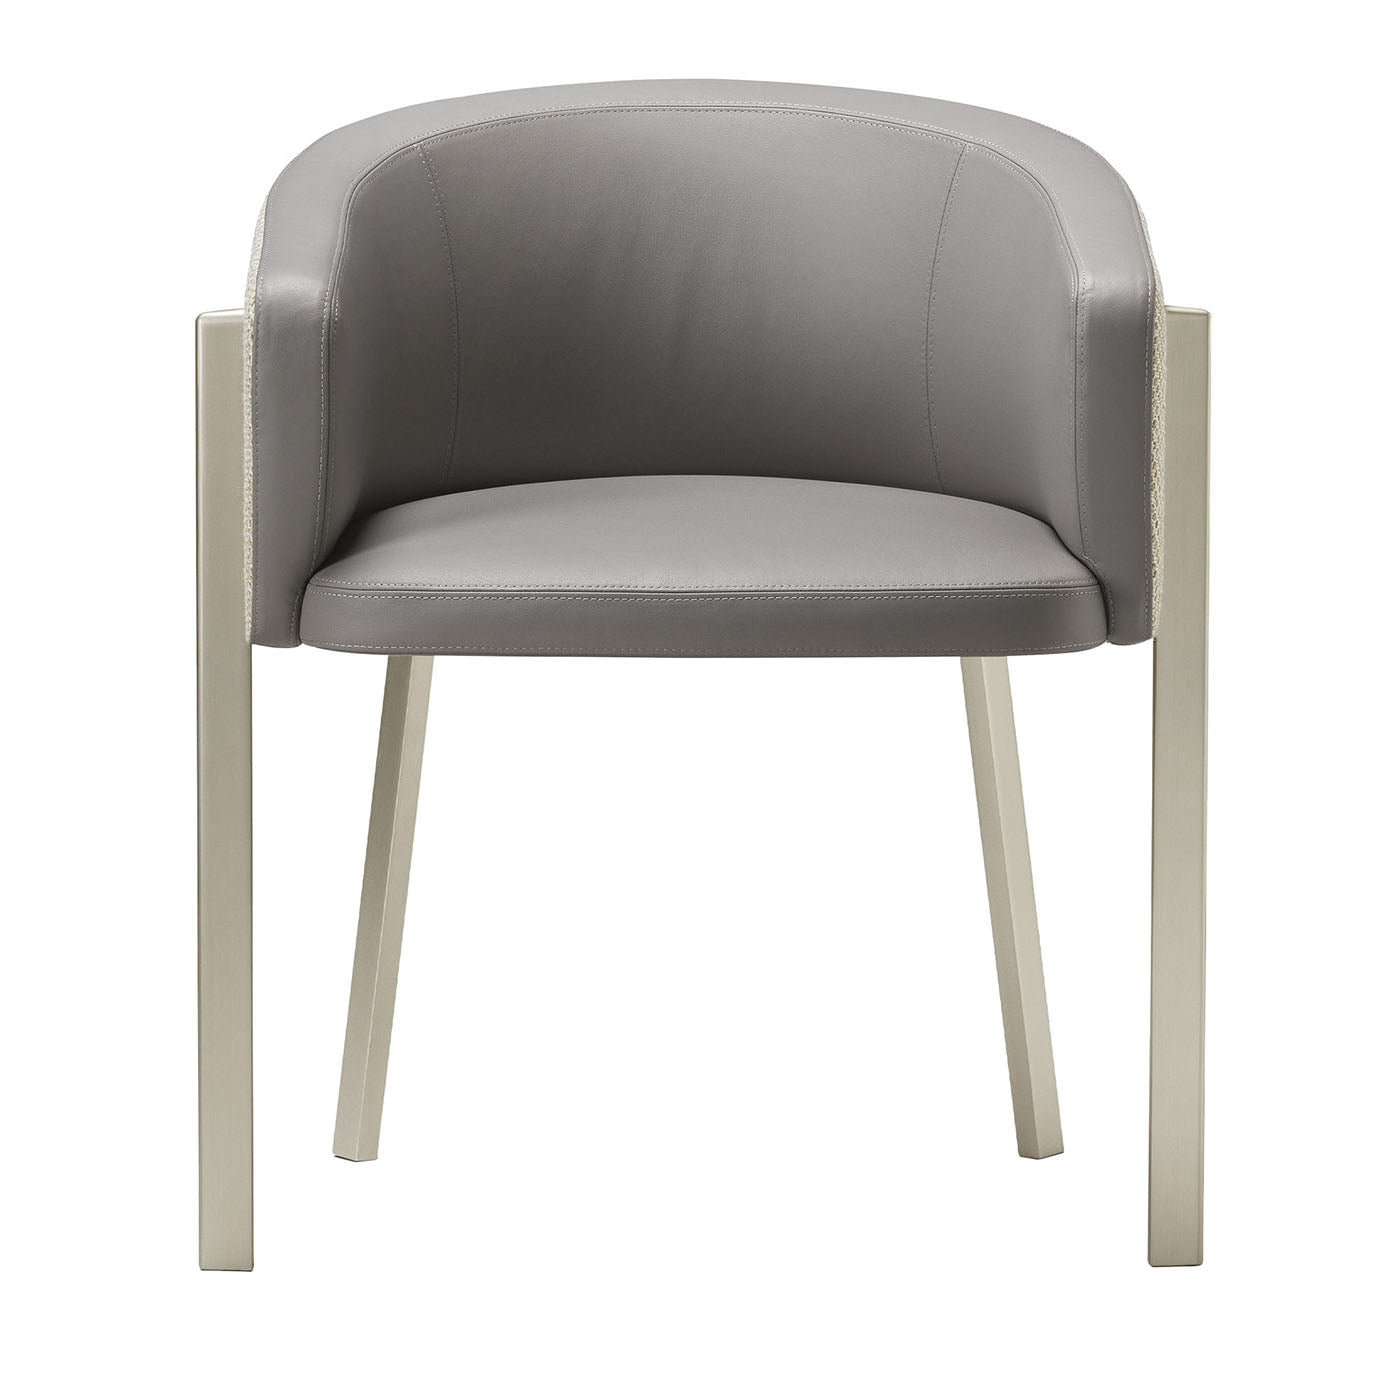 Arch Gray Leather Armchair by Richard Hutten - Main view